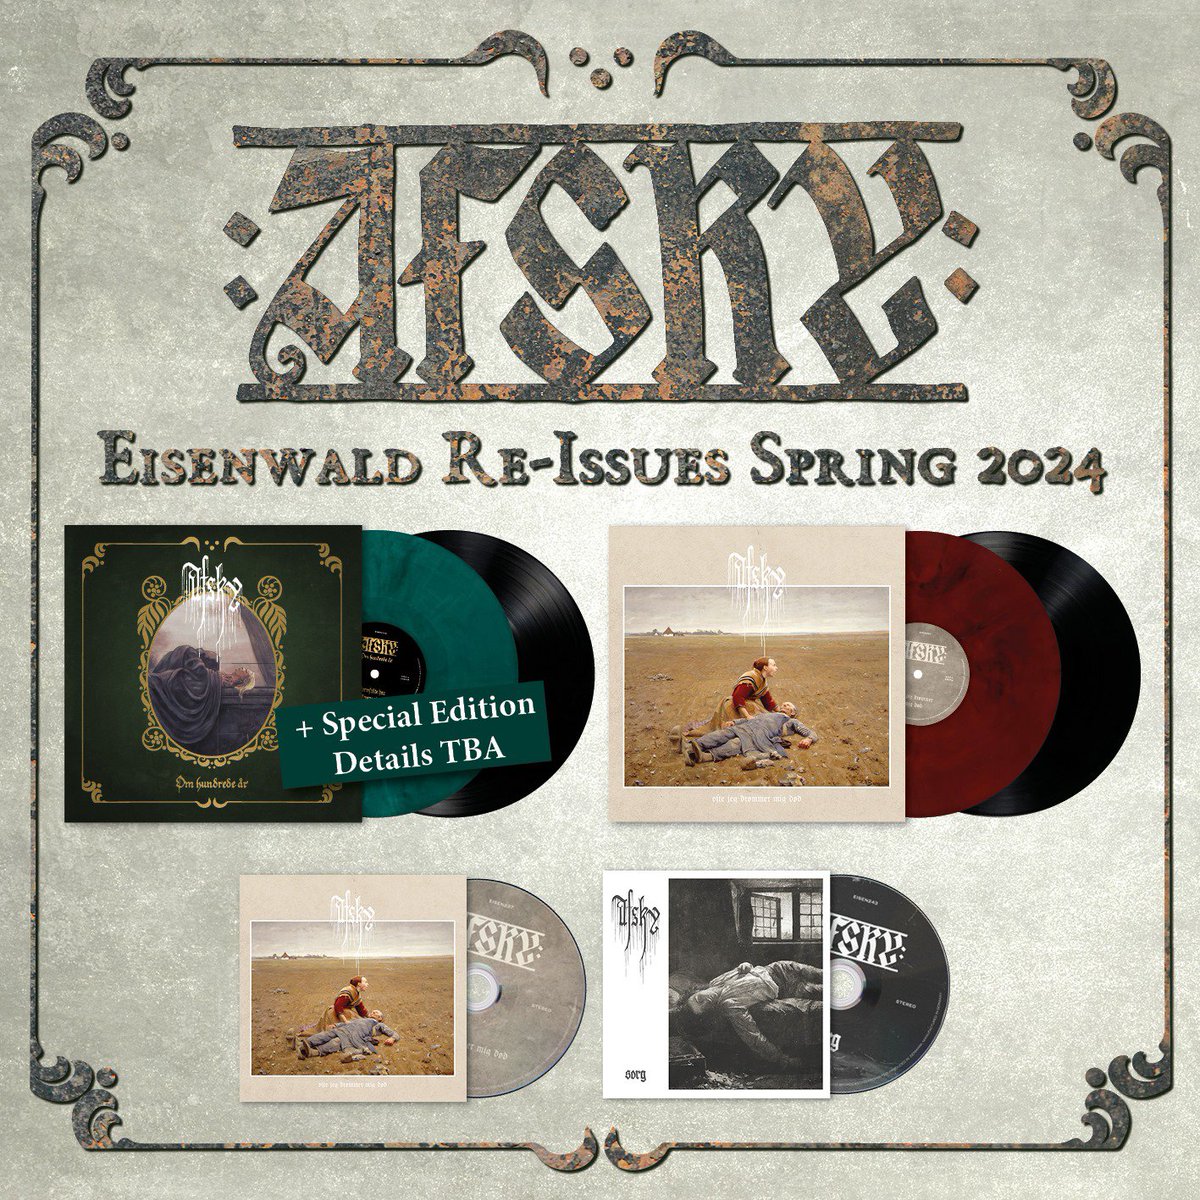 Nordic Spirits: AFSKY has joined the Eisenwald roster. Expect the first re-issues to be available in early 2024.  More news and details soon.